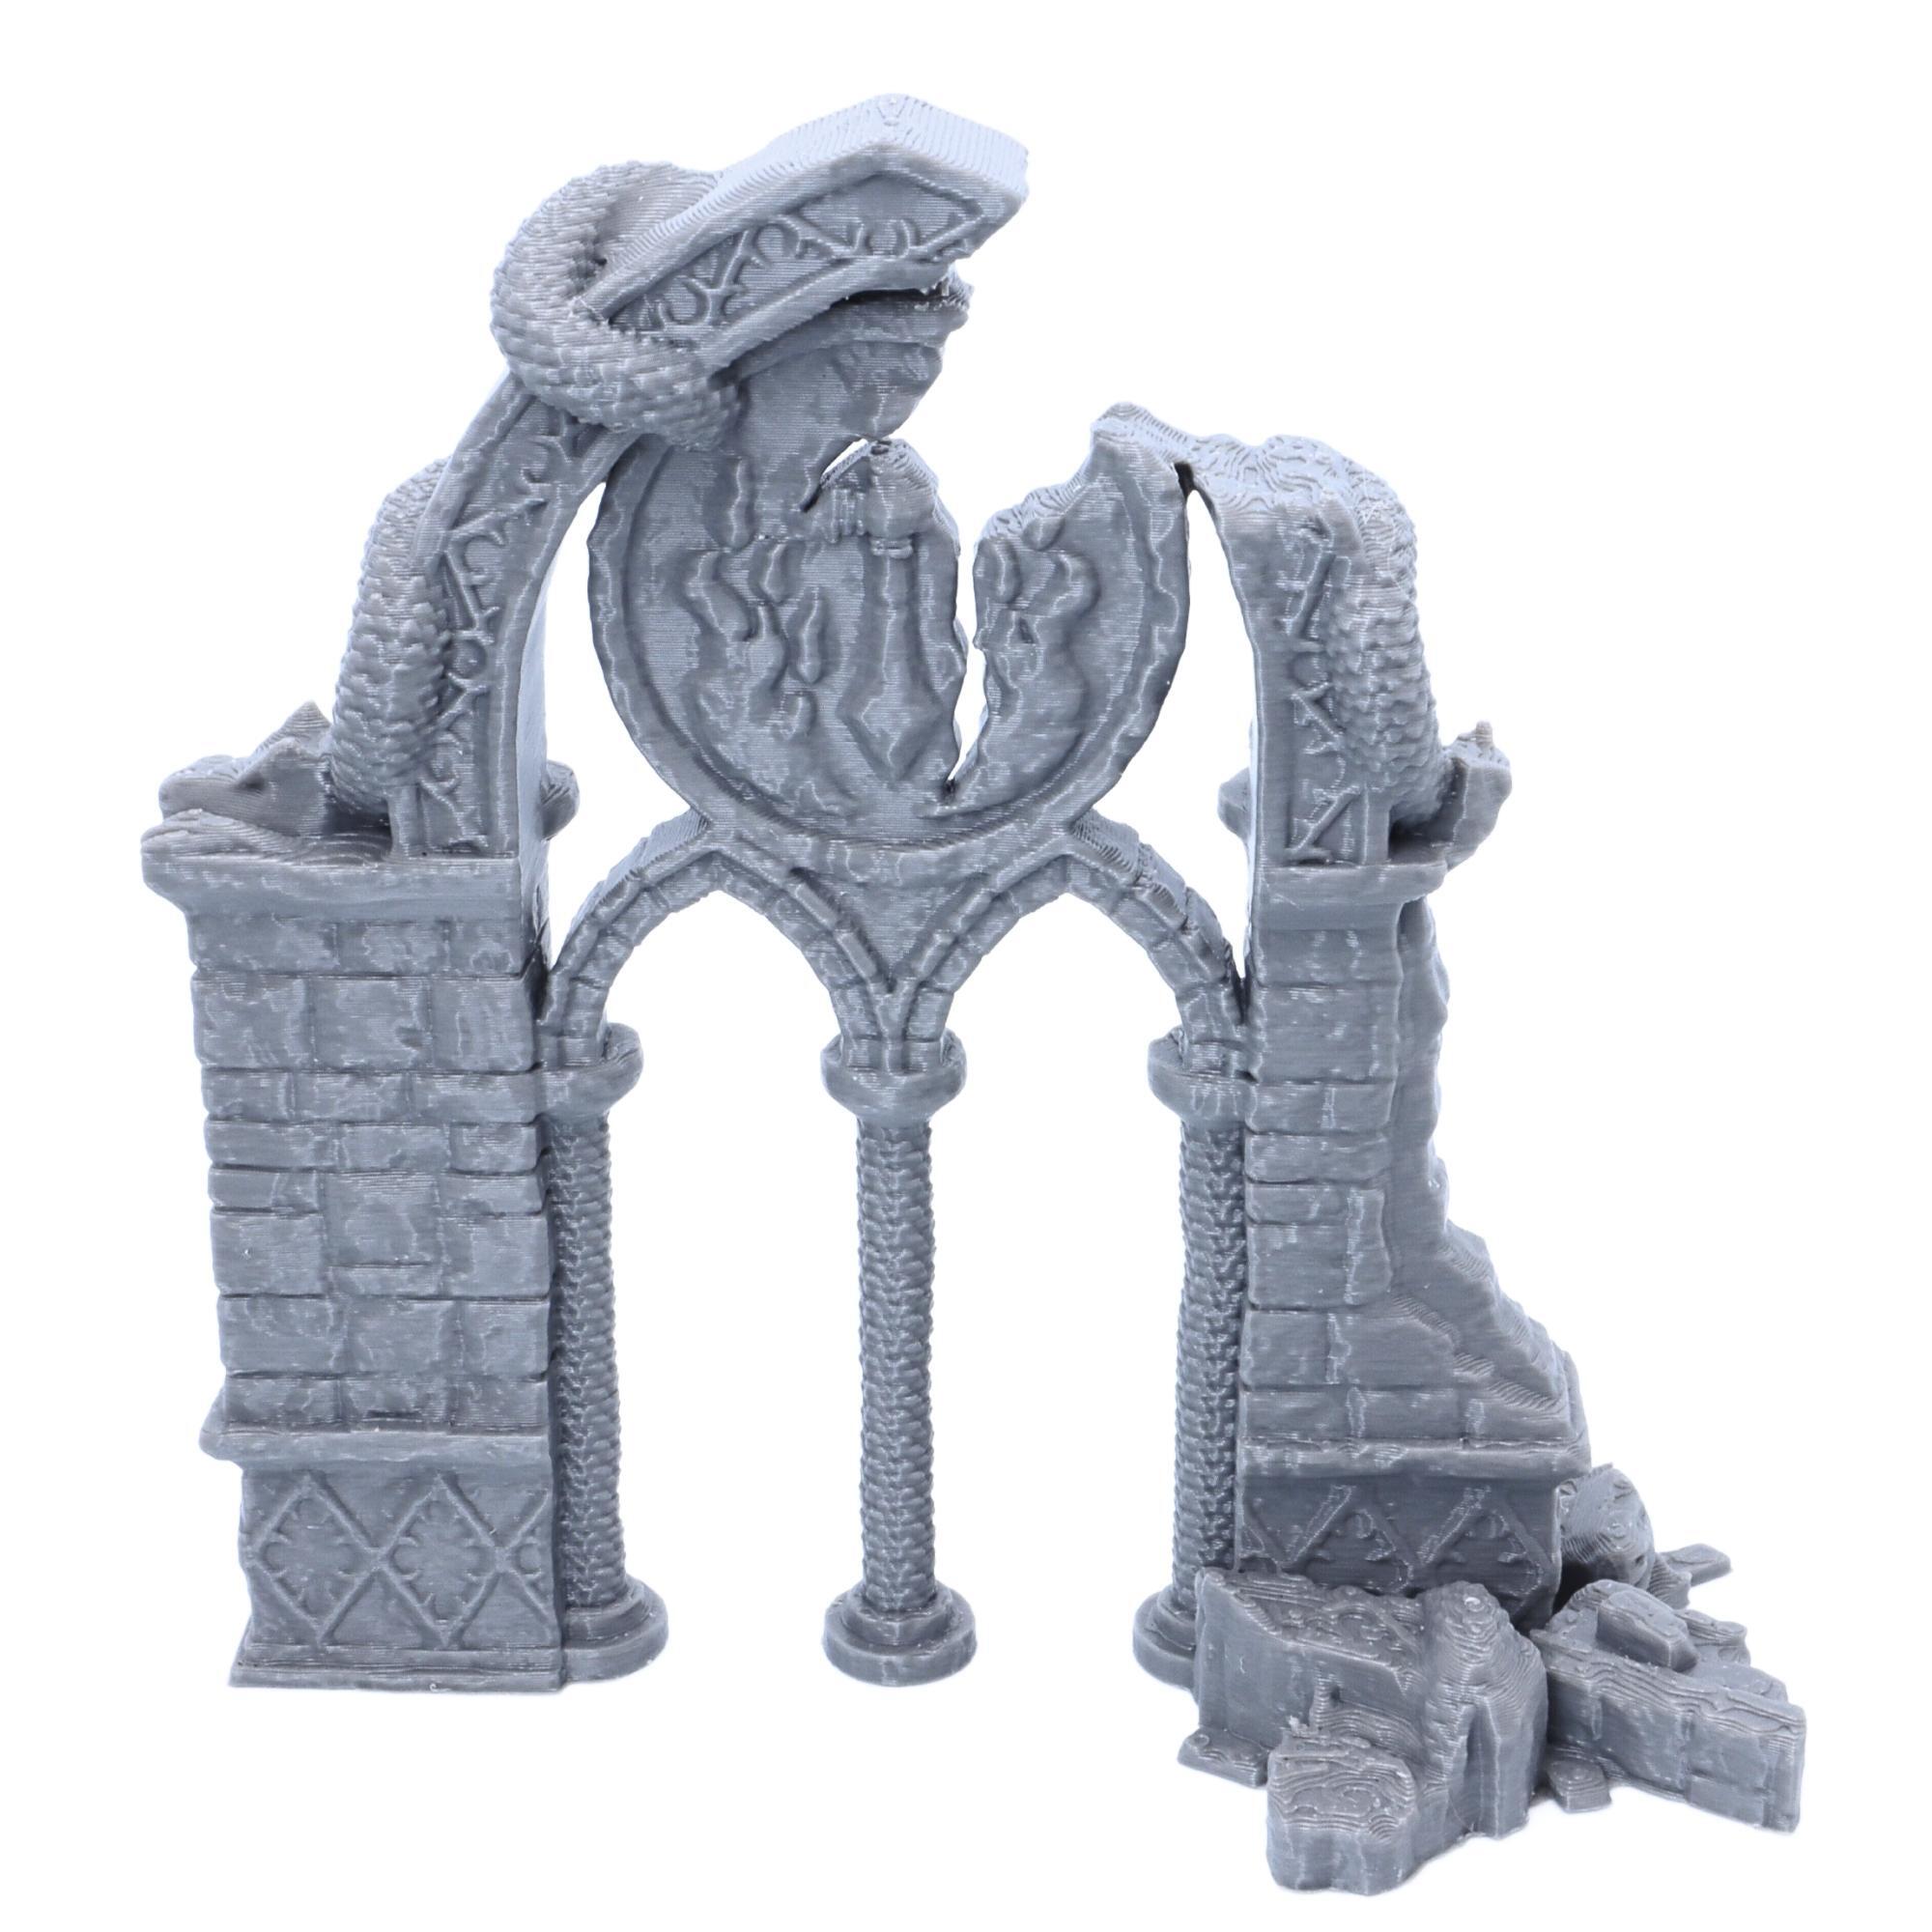 Dragon Archway Printed Scatter Terrain